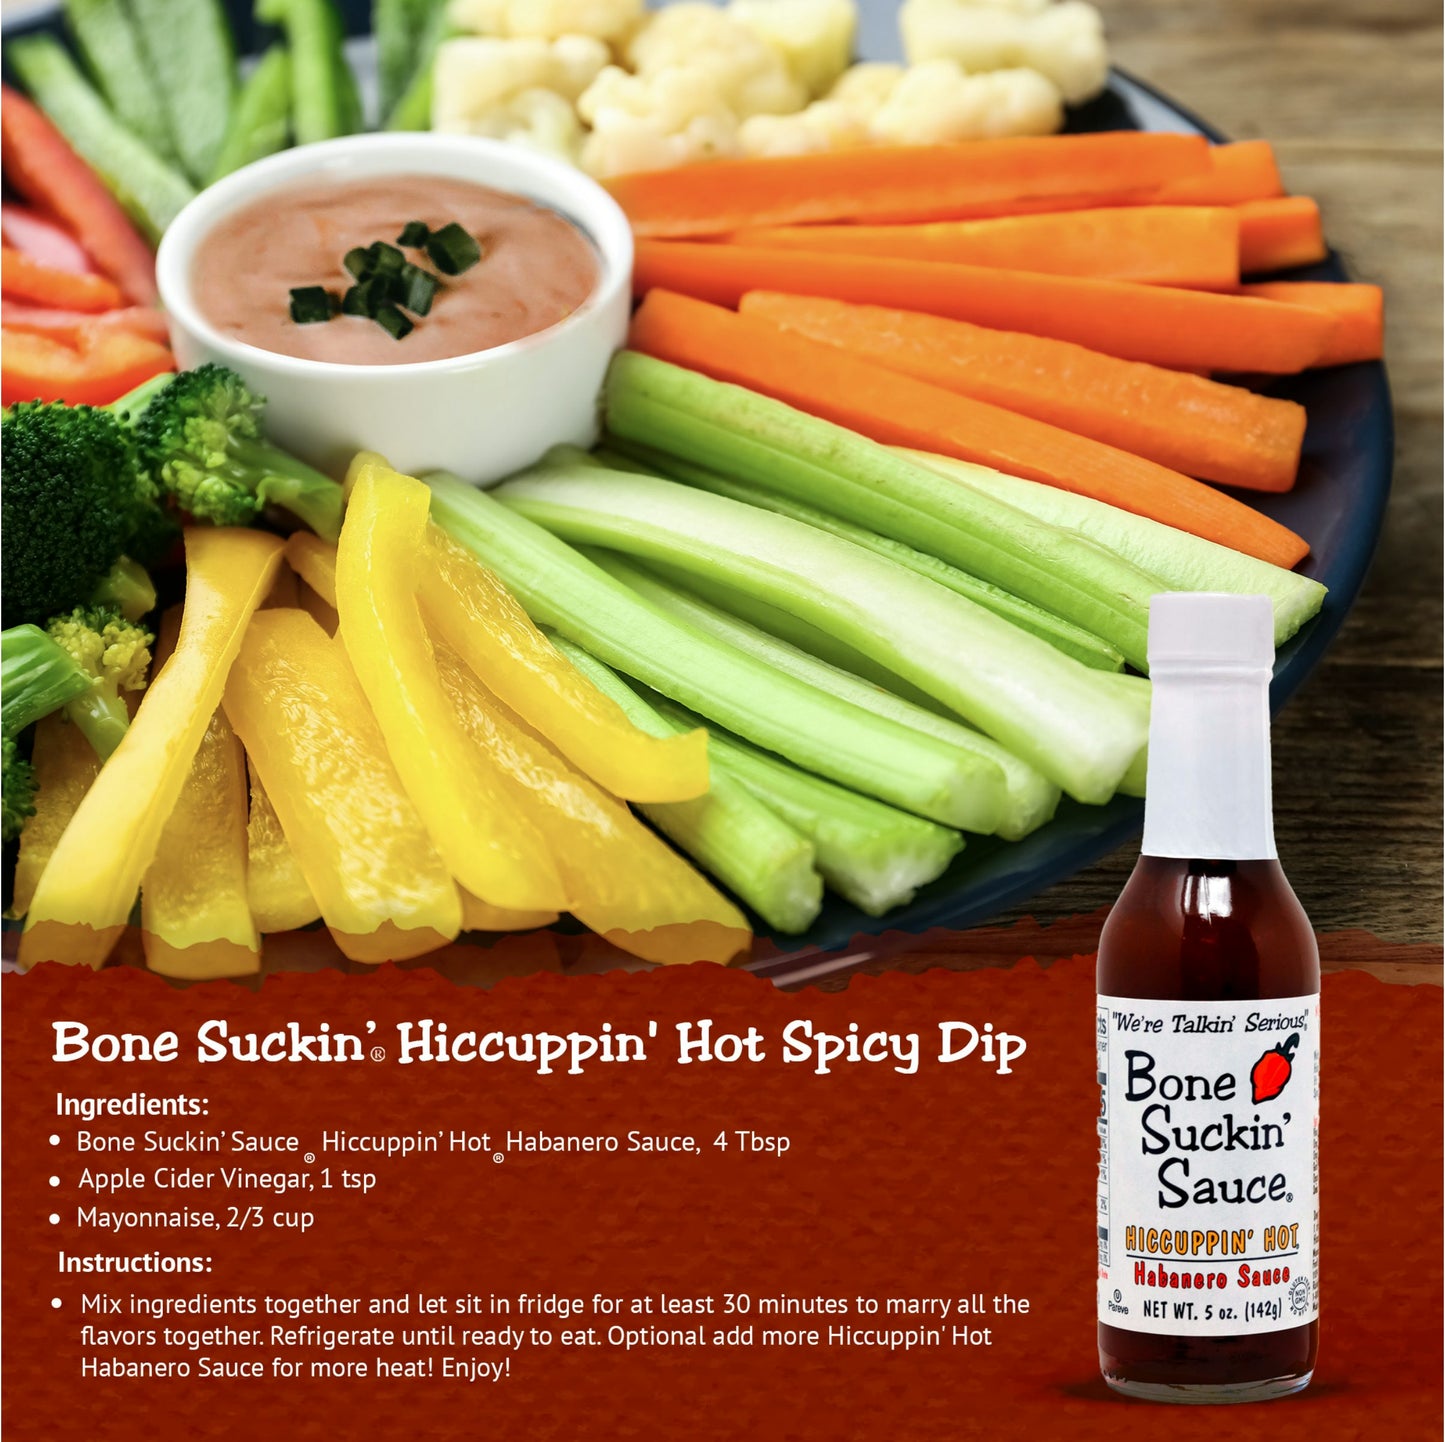 Bone Suckin' Hiccuppin' Hot Spicy Dip Recipe. Ingredients: Bone Suckin Hiccuppin Hot Habanero Sauce, 4 Tbsp, Apple Cider Vinegar, 1 Tsp, Mayonnaise, 2/3 cup. Instructions: Mix ingredients together and let sit in fridge for at least 30 minutes to marry all the flavors together. Refrigerate until ready to eat. Optional: Add more Hiccuppin Hot sauce for more heat. Enjoy!